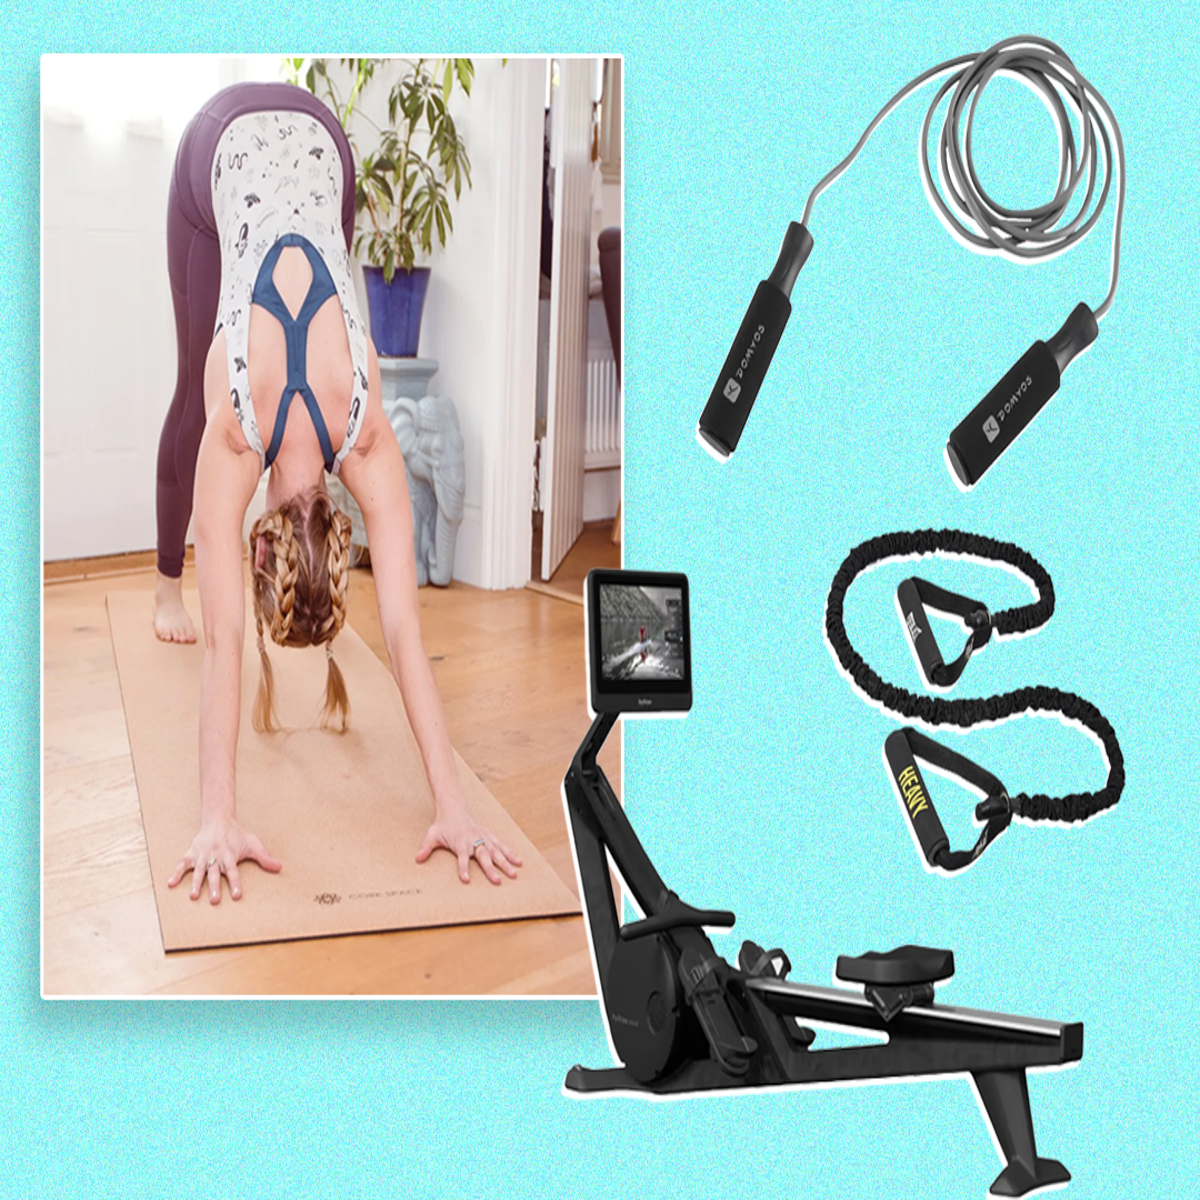 https://static.independent.co.uk/2023/08/11/14/Gym%20equiptment.png?width=1200&height=1200&fit=crop